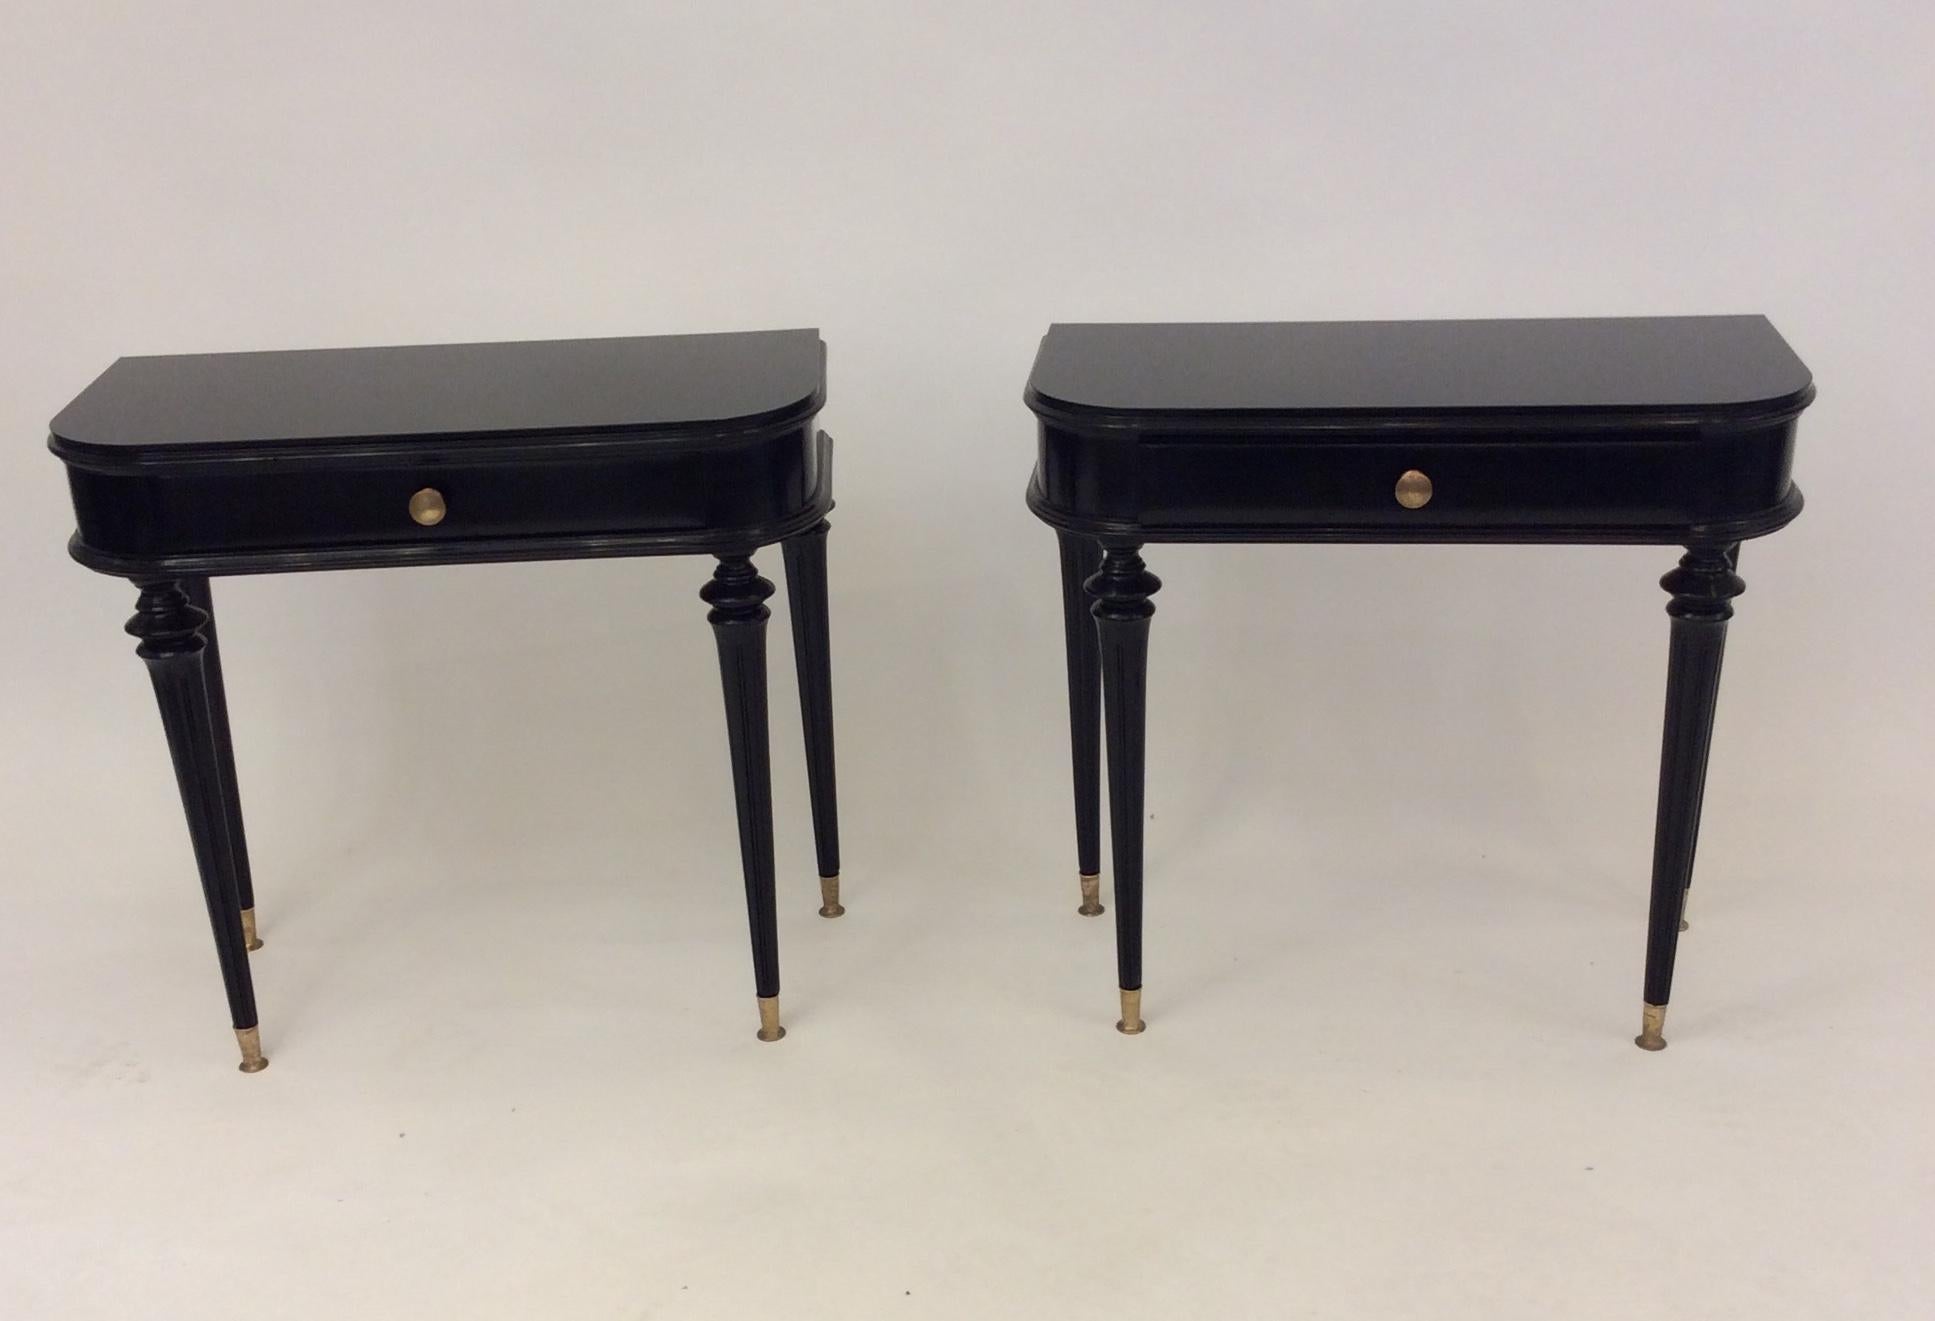 A pair of Italian side tables/nightstands in black lacquer over wood, glass top, each with a drawer with brass hardware and brass shoes on the legs
attributed to Paola Buffa, circa late 1940s.